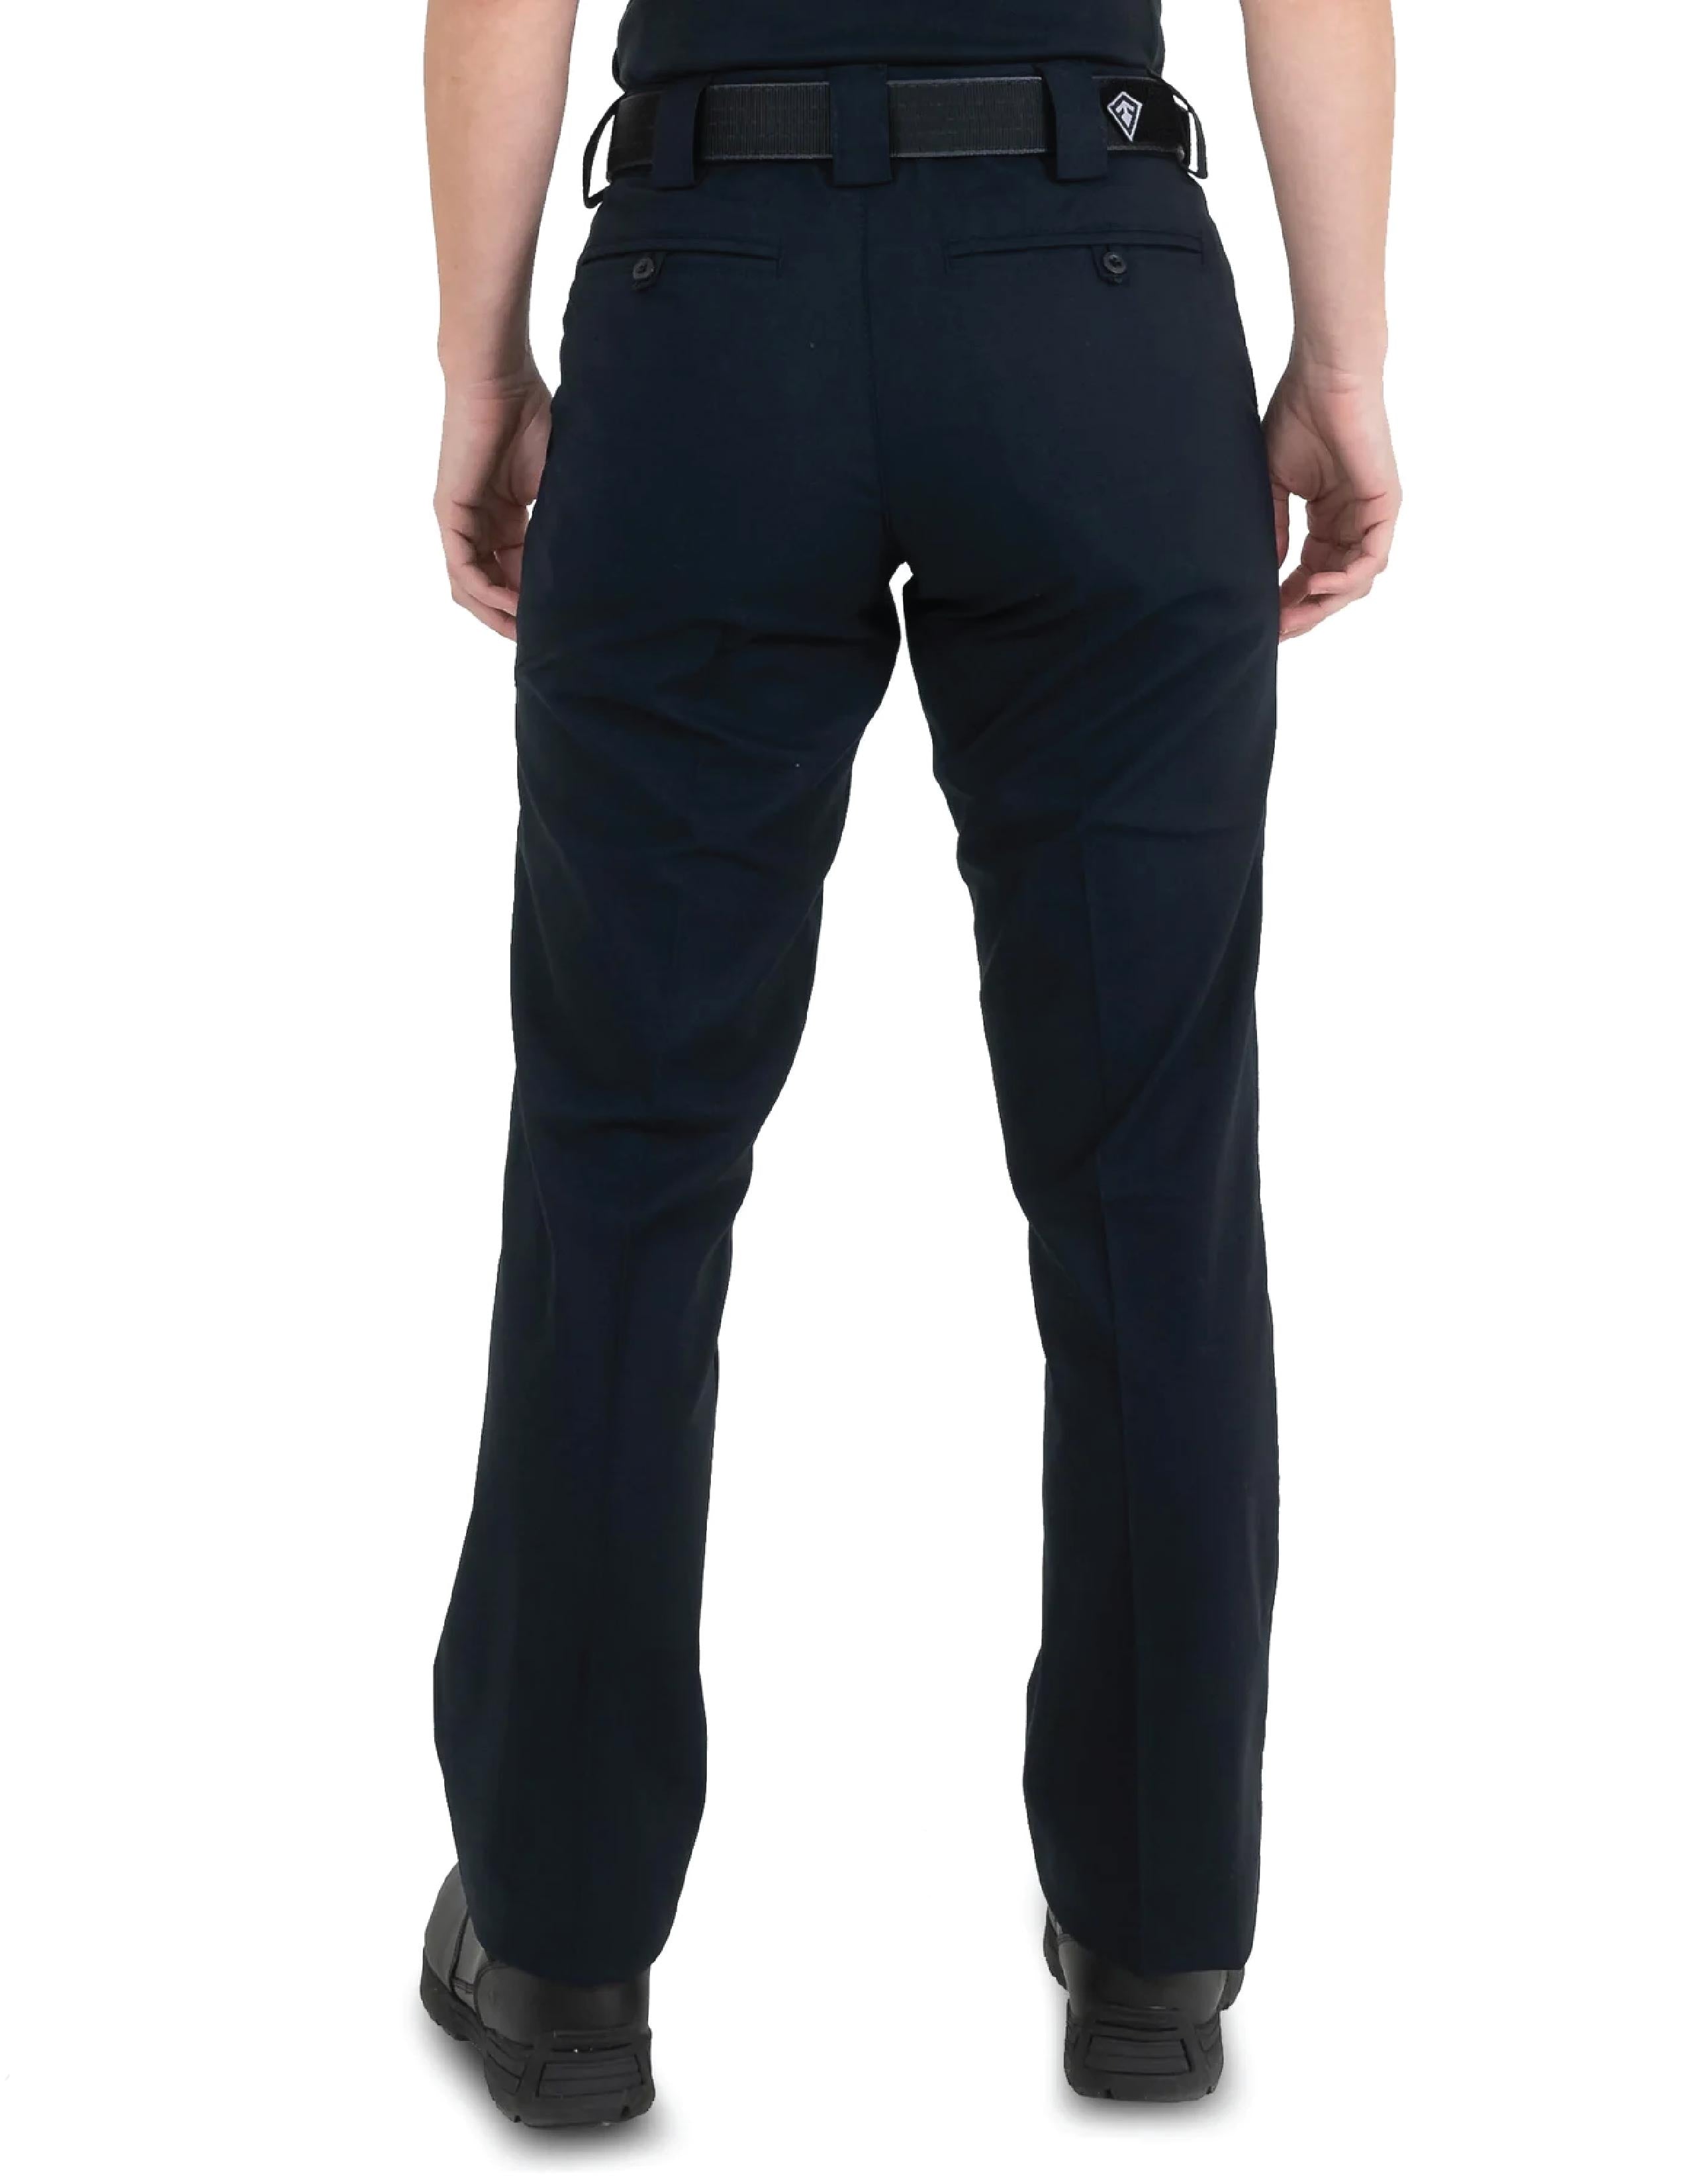 O) STYLE# 124018 WOMENS FIRST TACTICAL PRO DUTY UNIFORM PANTS